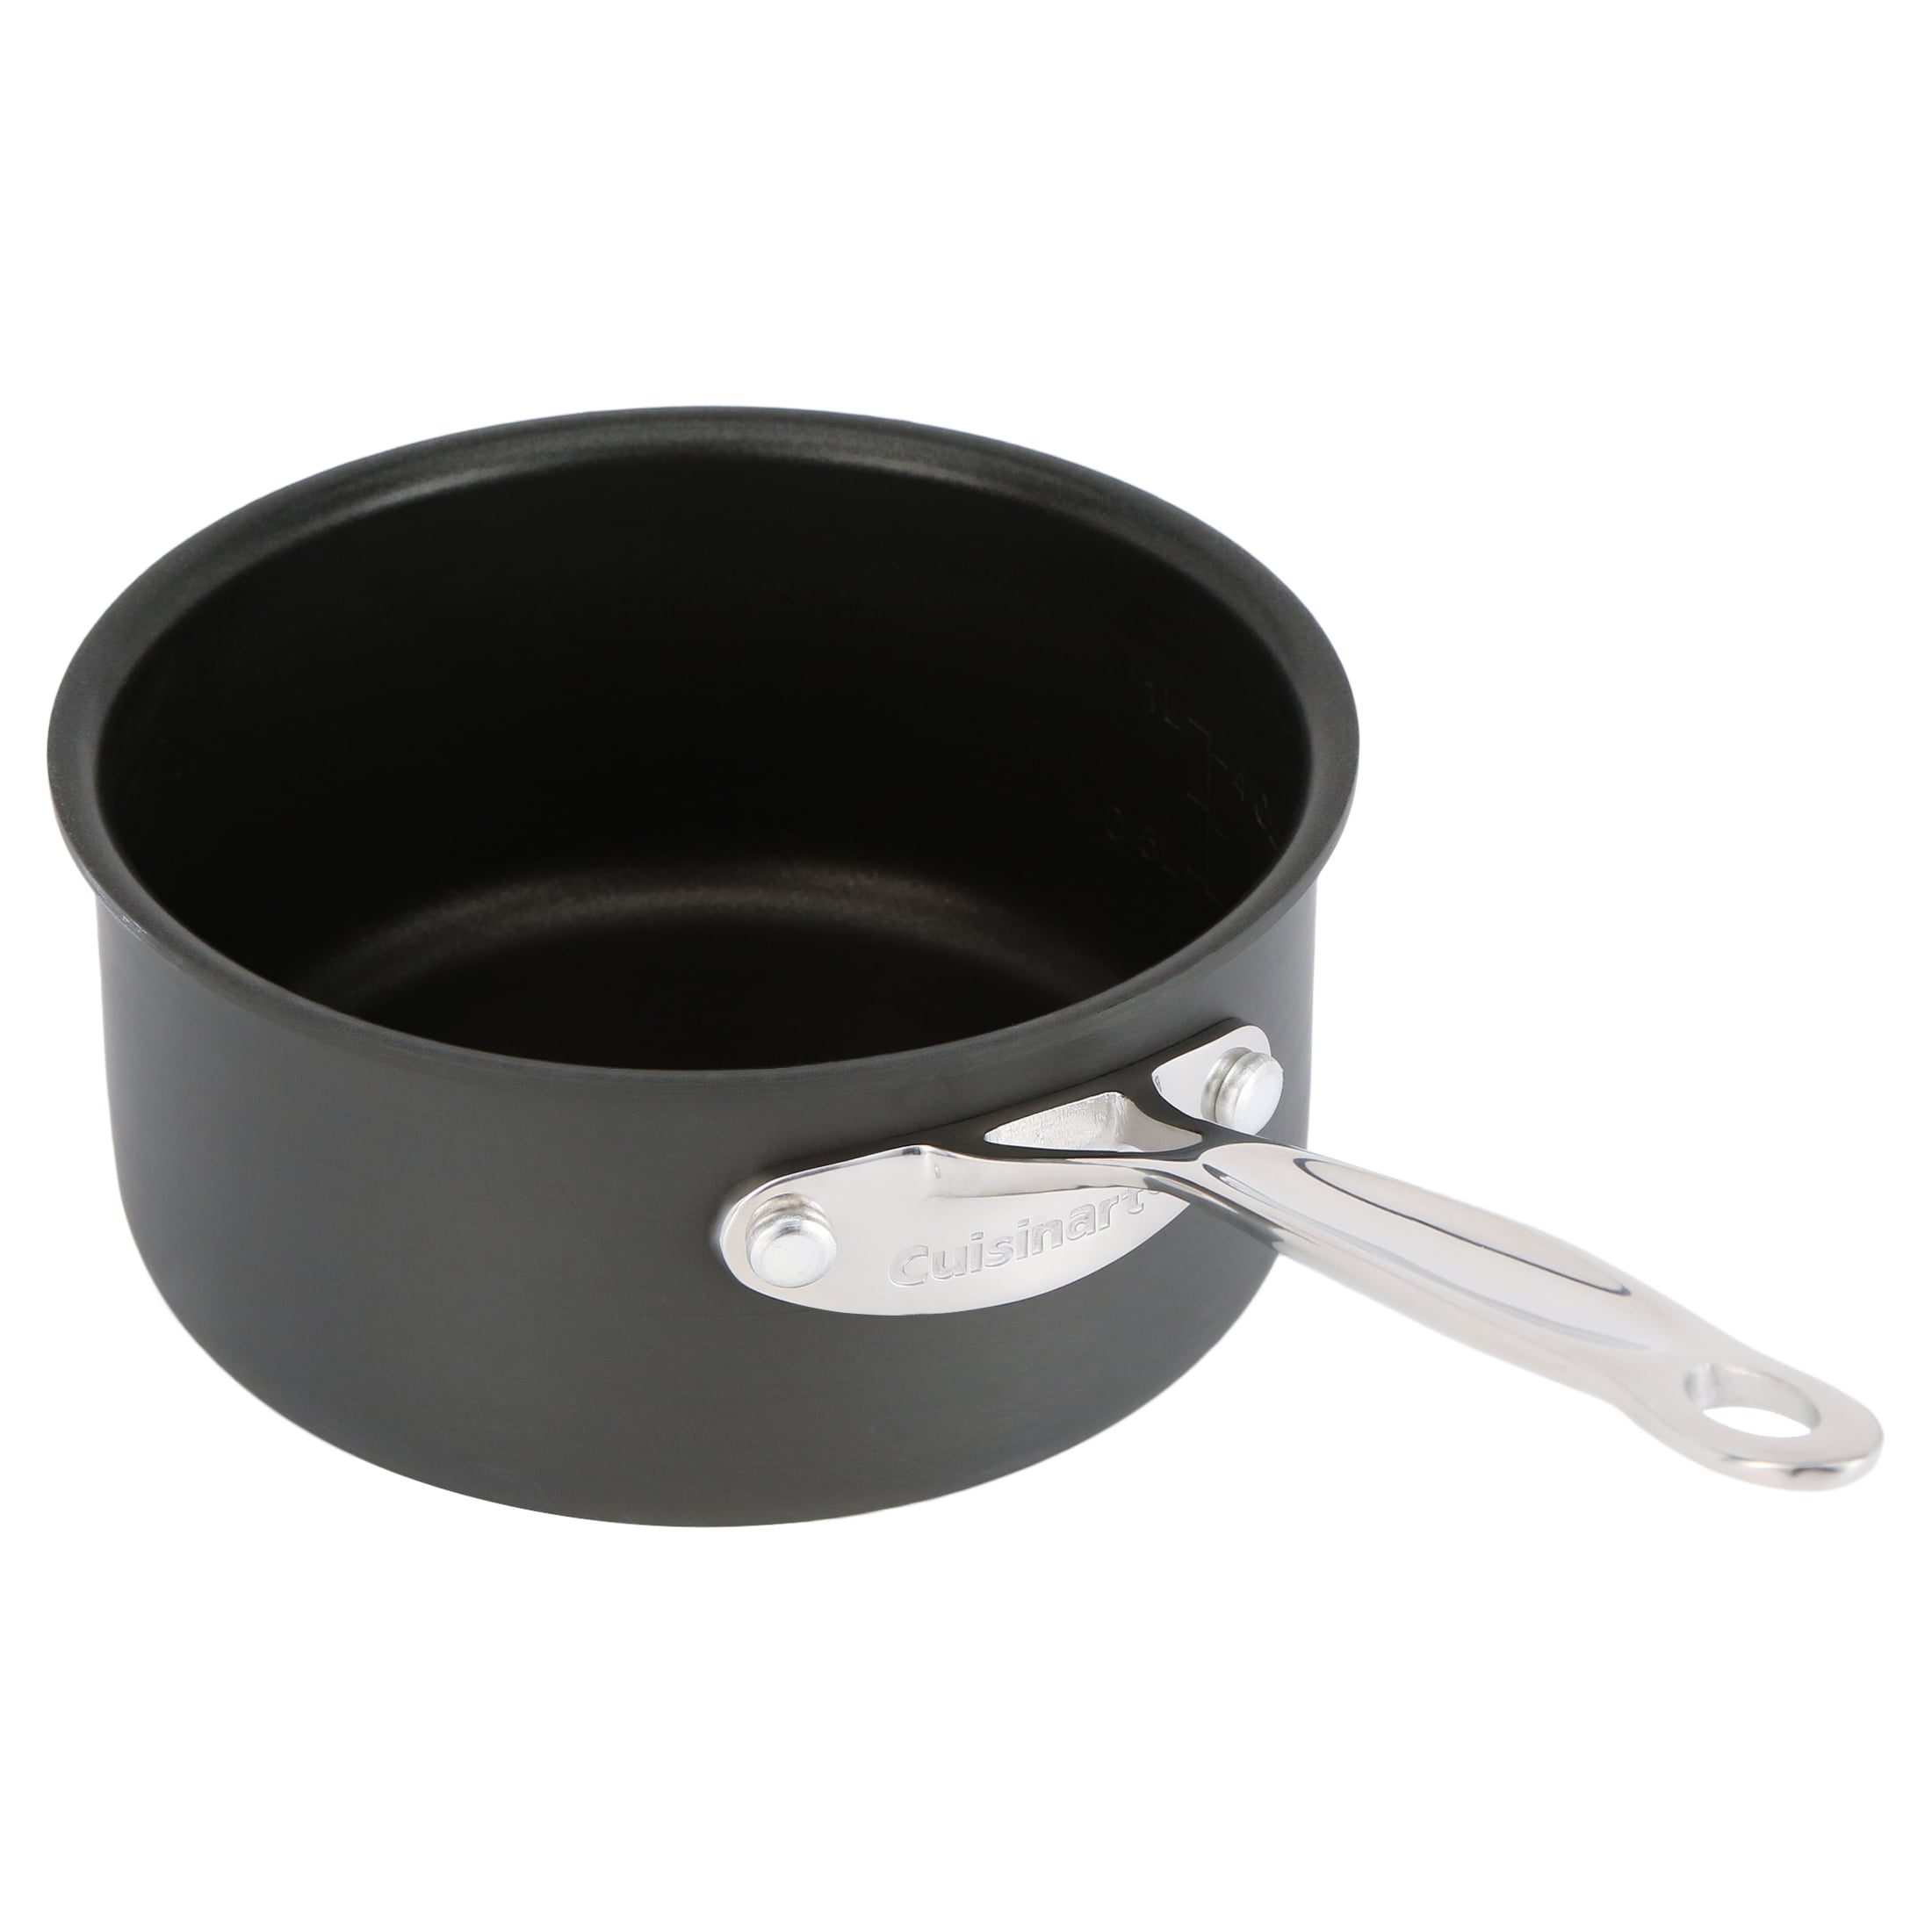 Chef's Classic™ Nonstick Hard Anodized 1.5 Quart Saucepan with